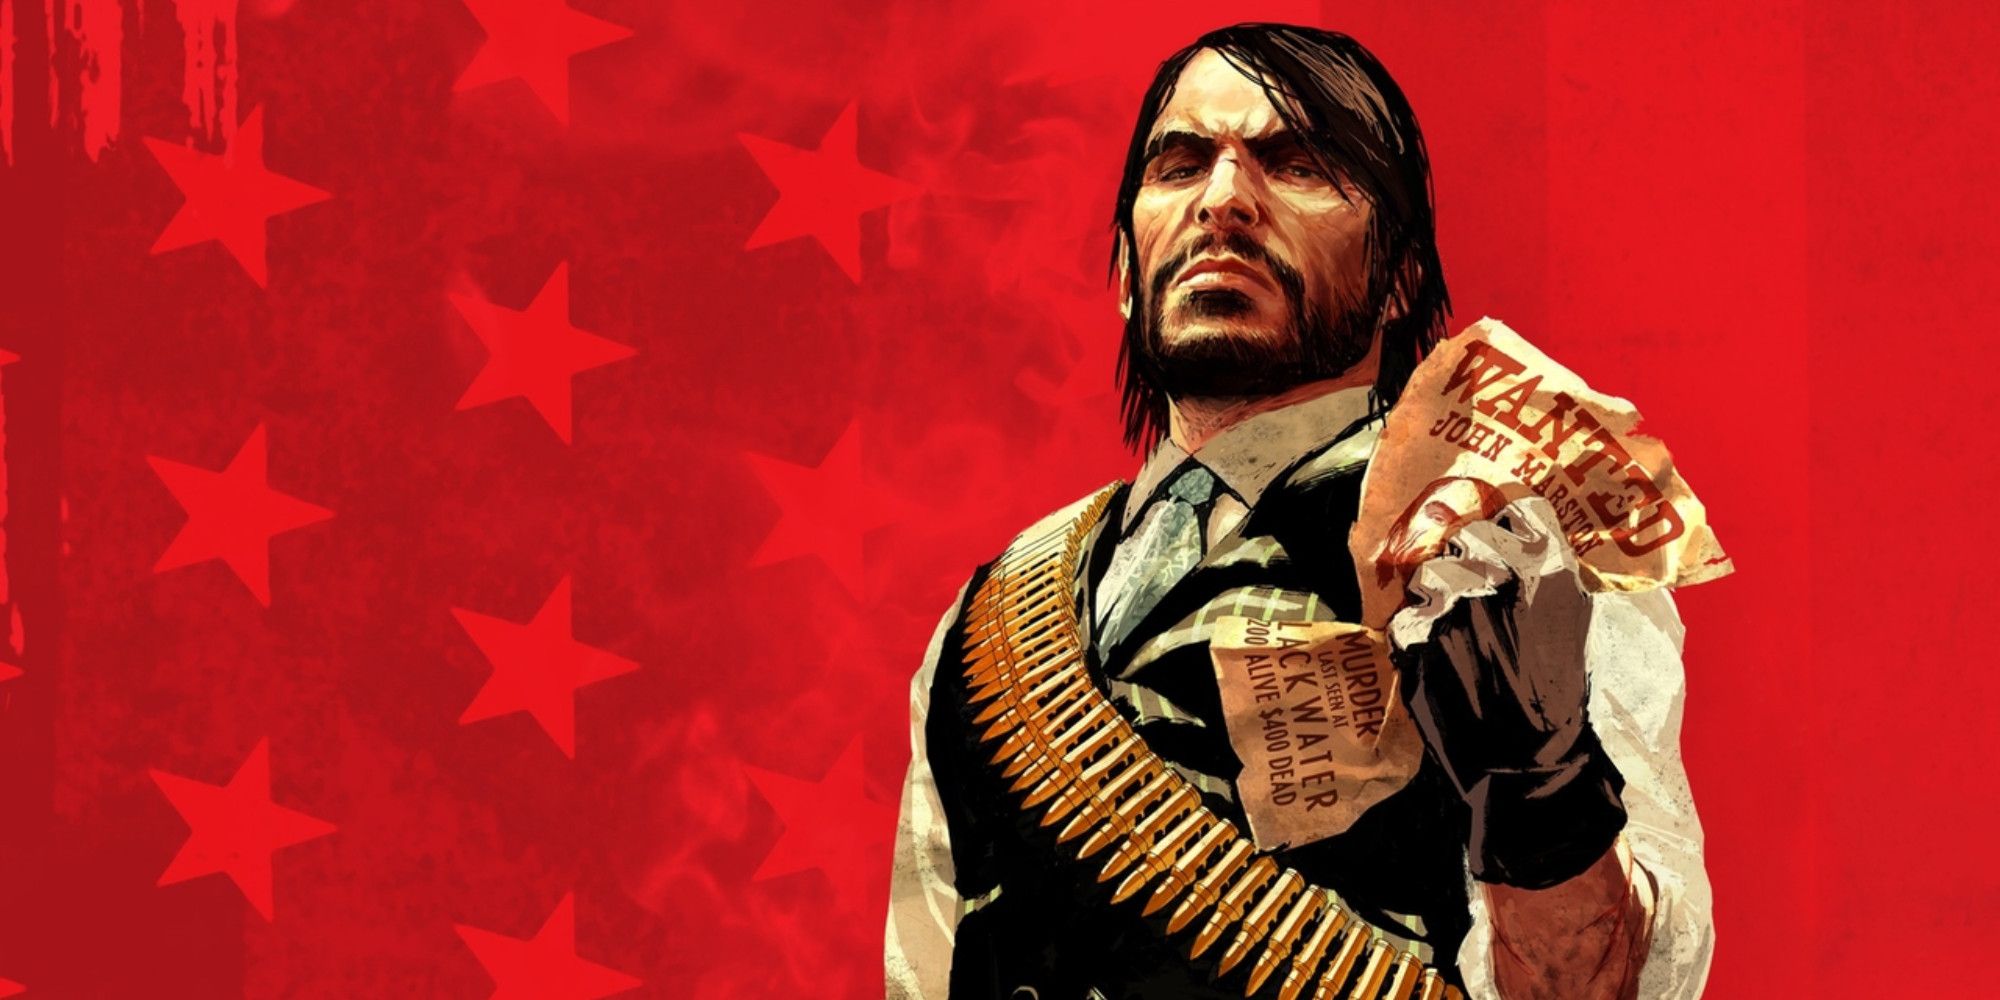 Red Dead Redemption's John Marston crumpling a wanted poster